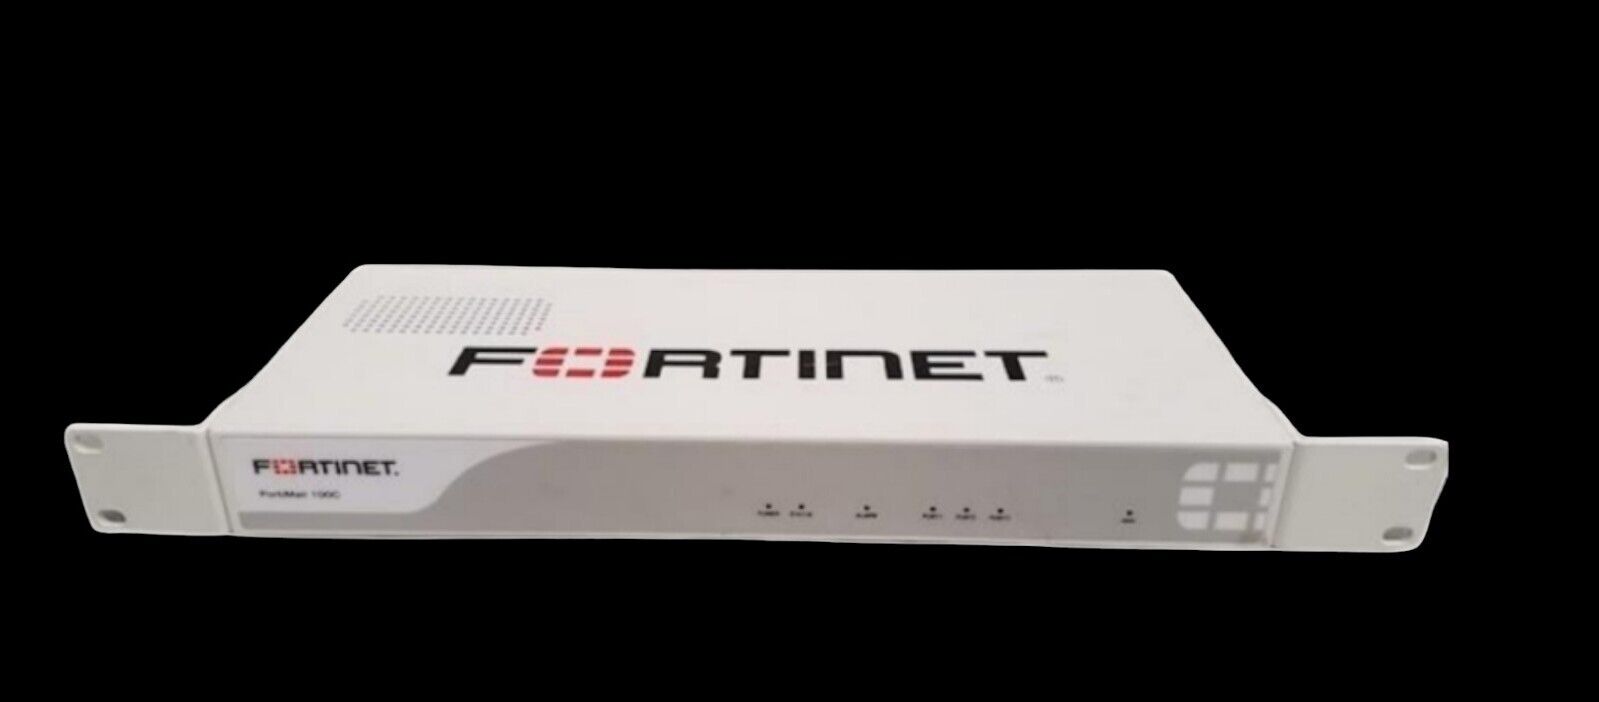 Fortinet PortAnalyzer 100C Network Security Monitoring Device